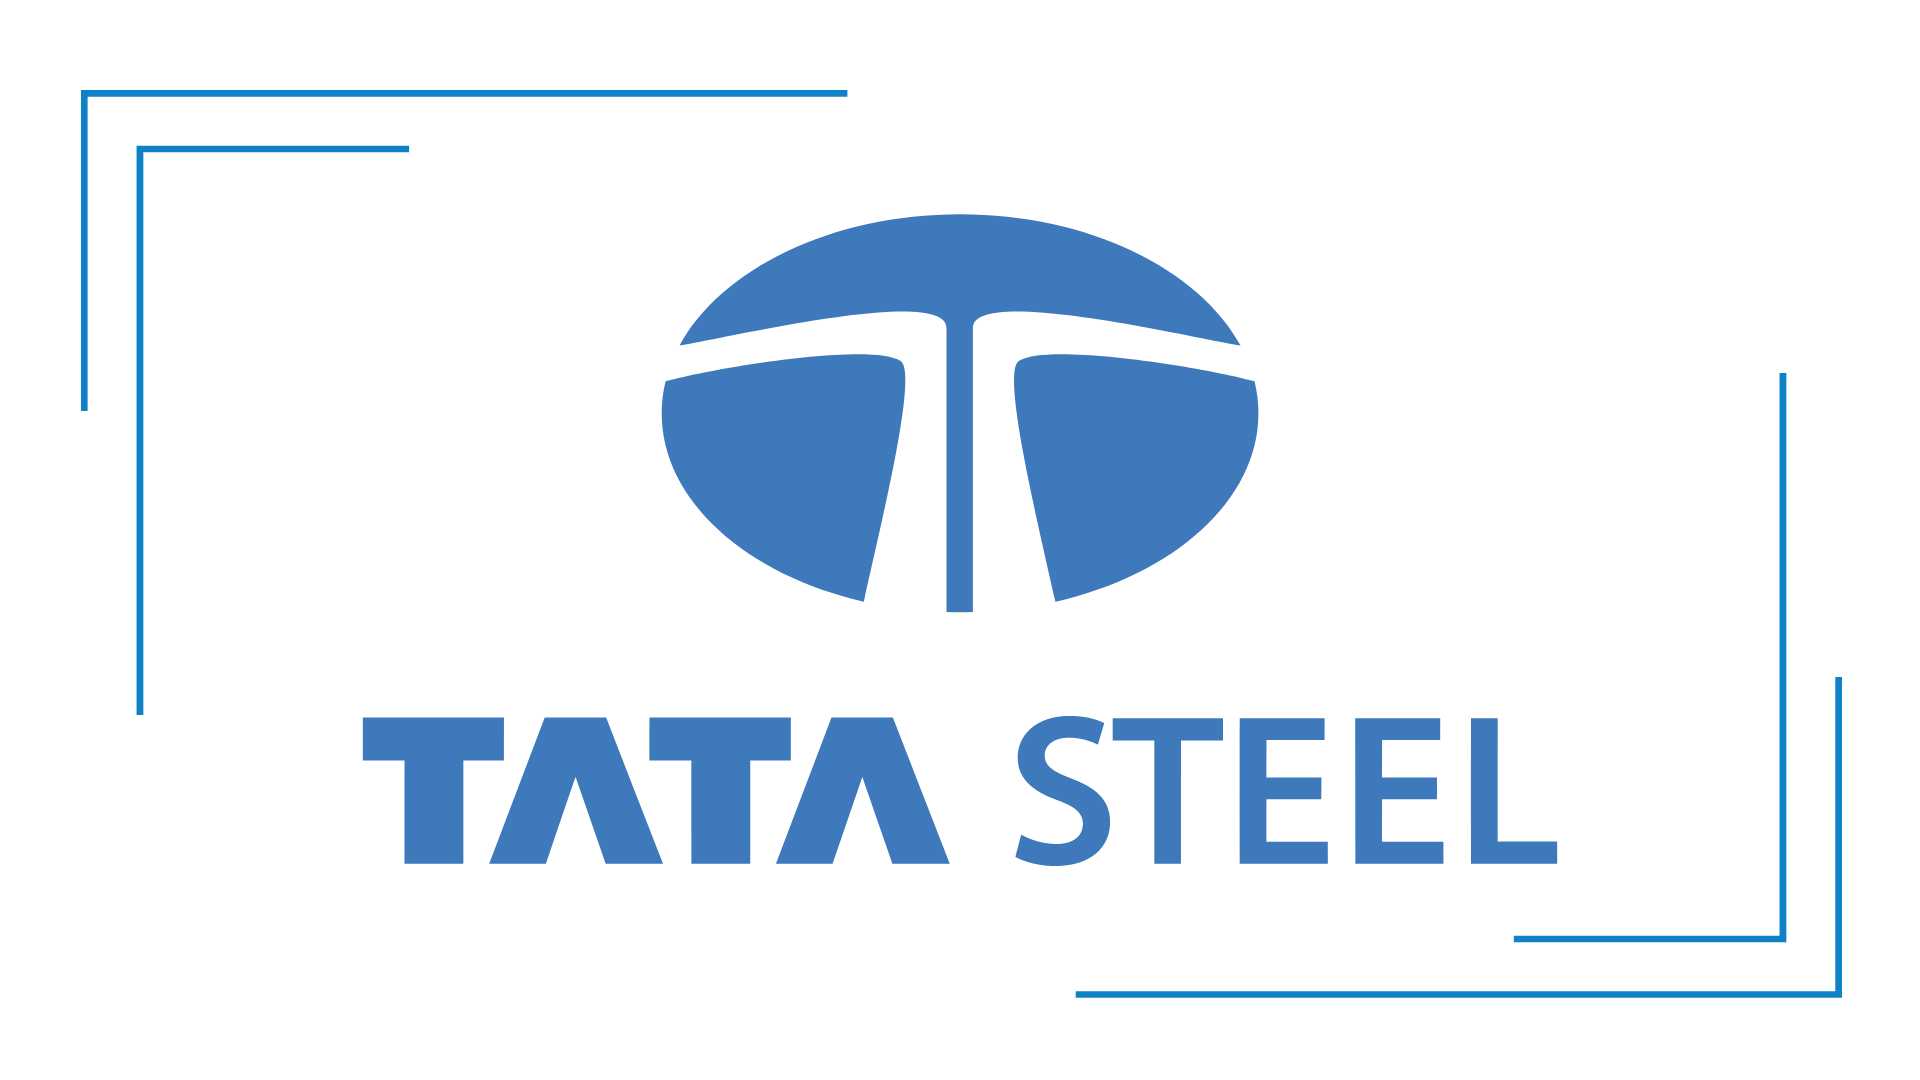 Tata Steel - List of Companies Owned by Tata Group